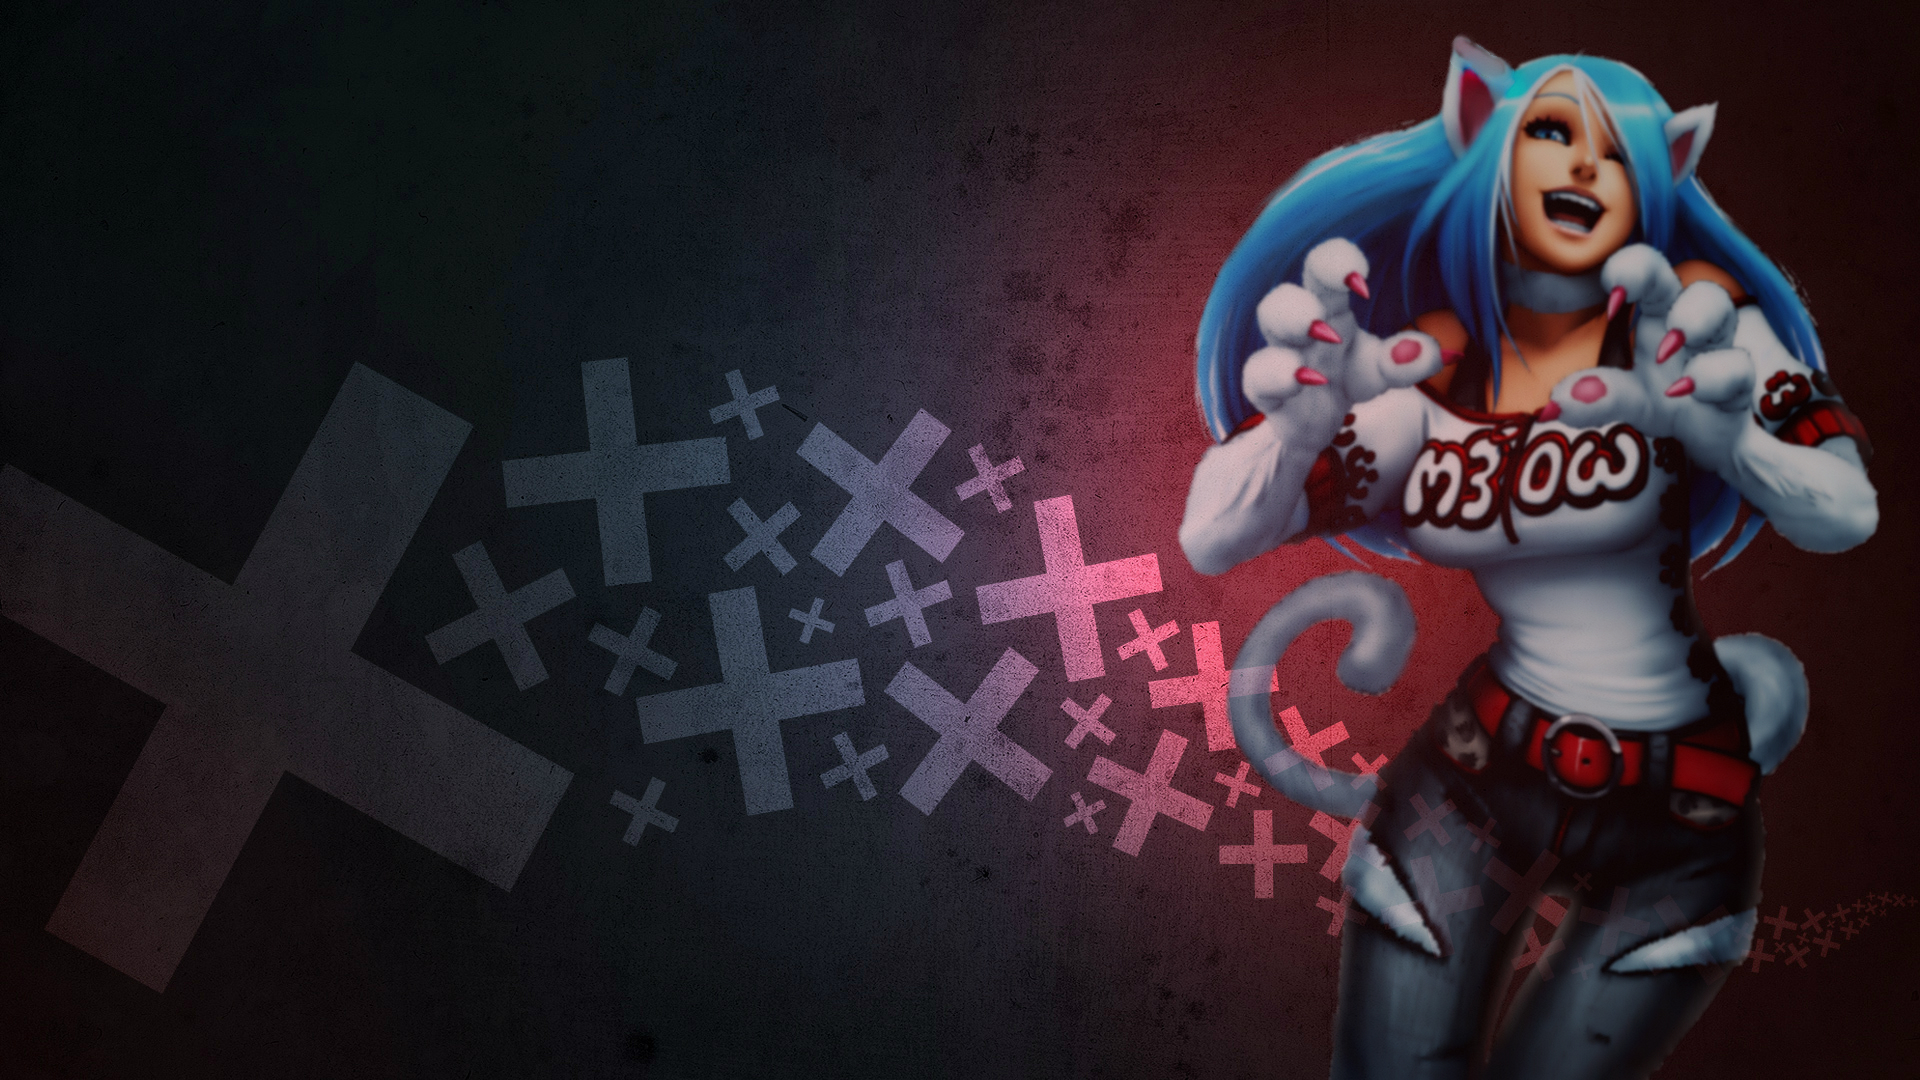 26 Darkstalkers HD Wallpapers Backgrounds - Wallpaper Abyss